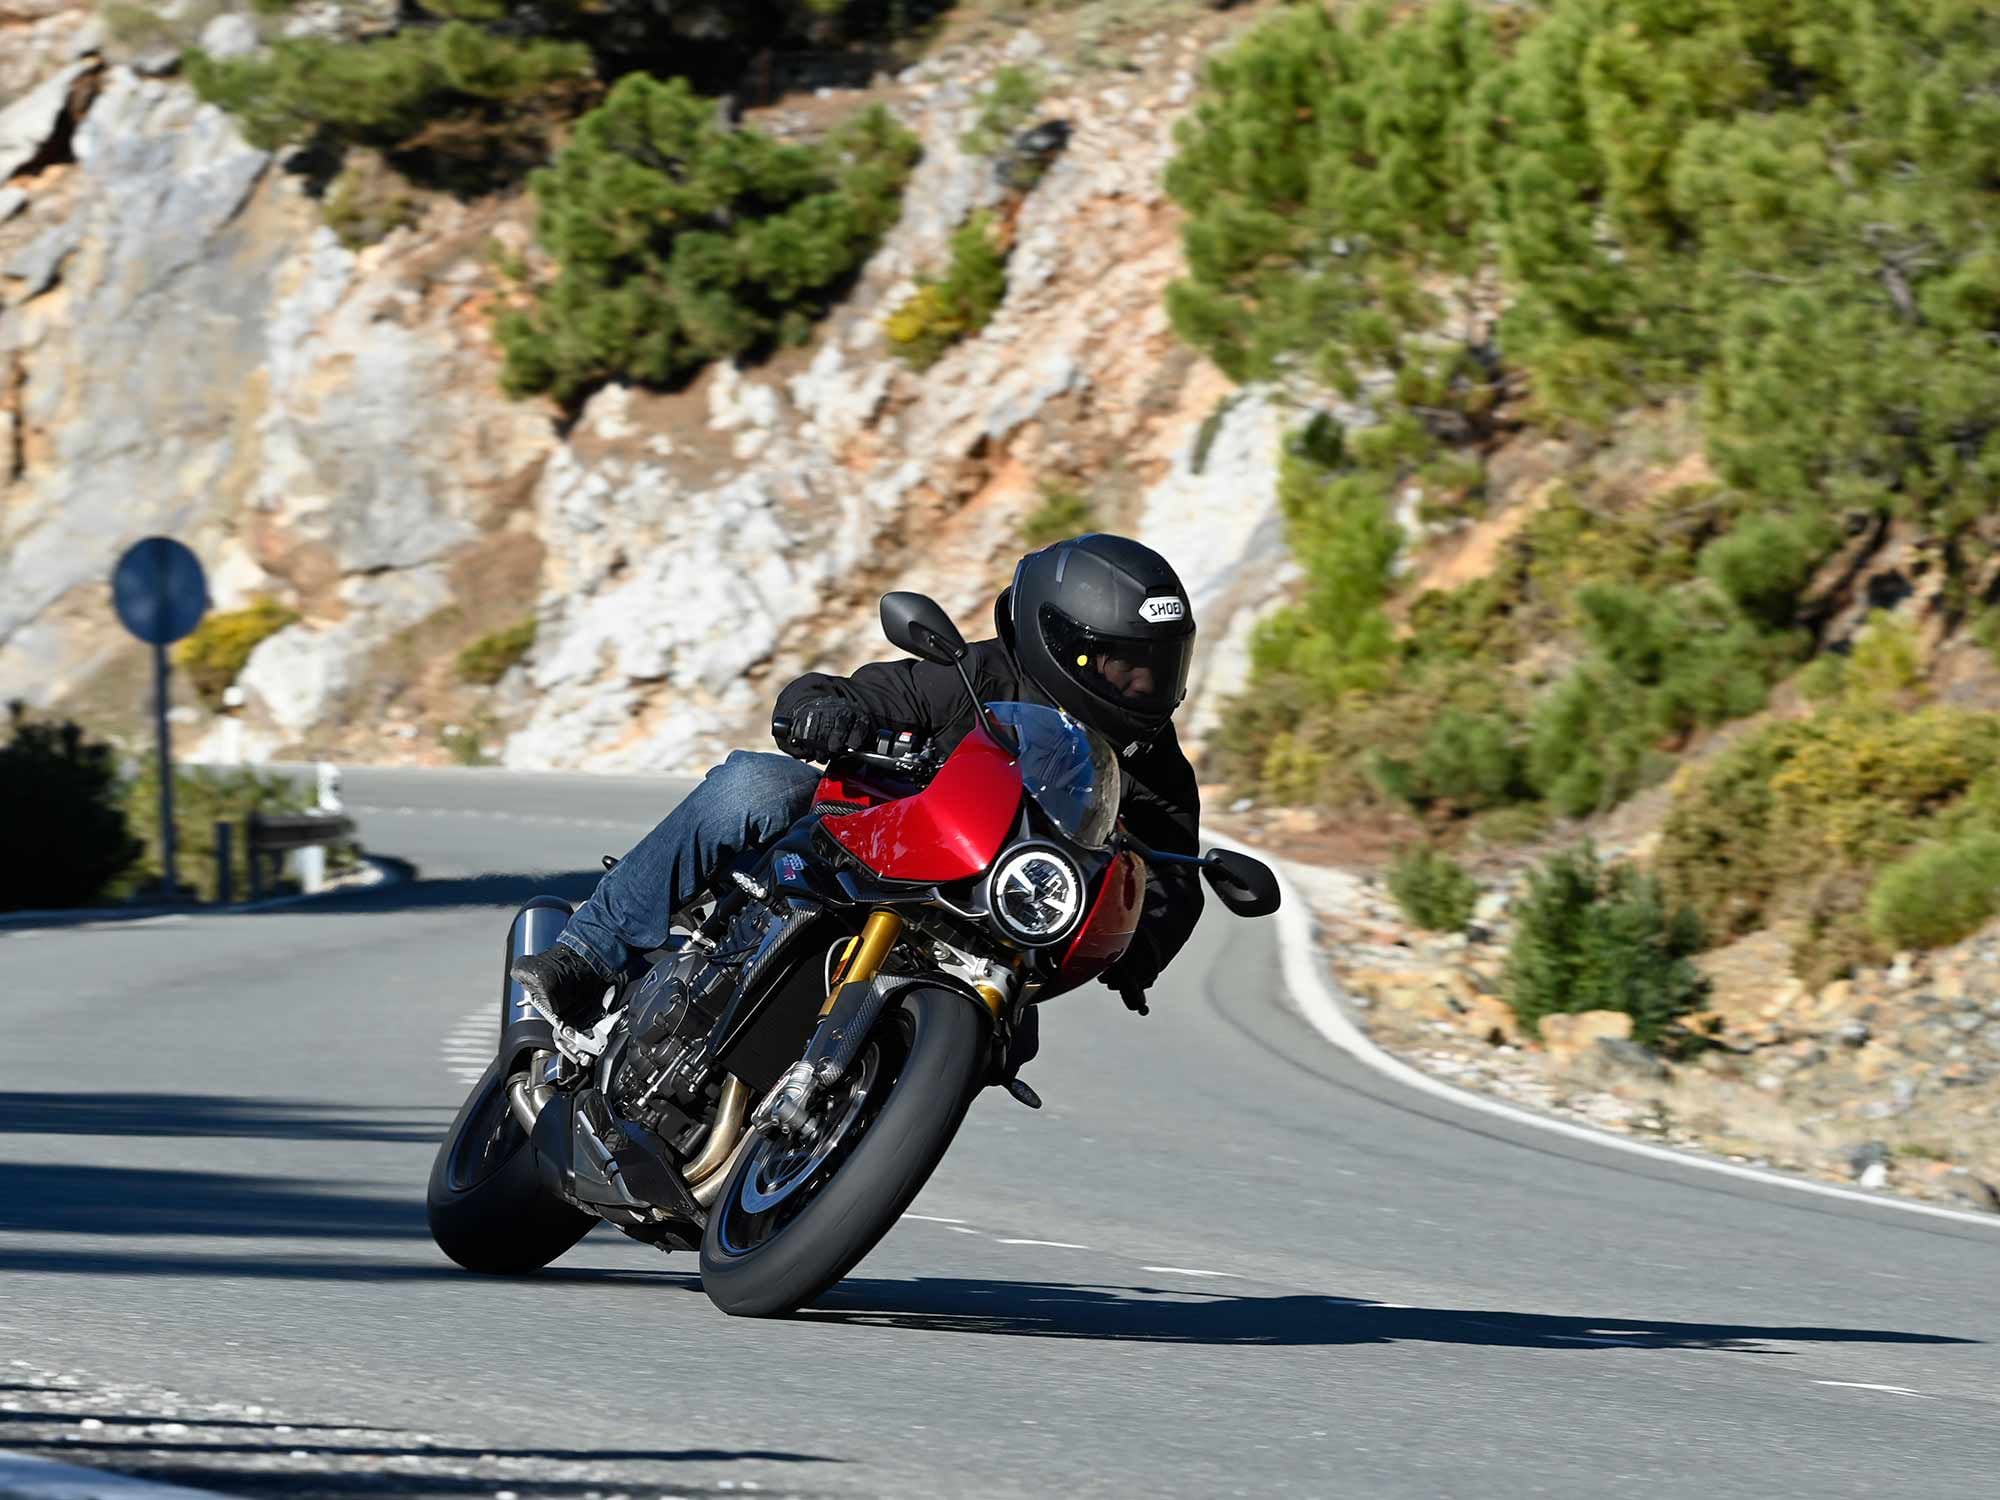 A comfortable riding position and electronic suspension make sense for all-day enjoyment on mountain roads.